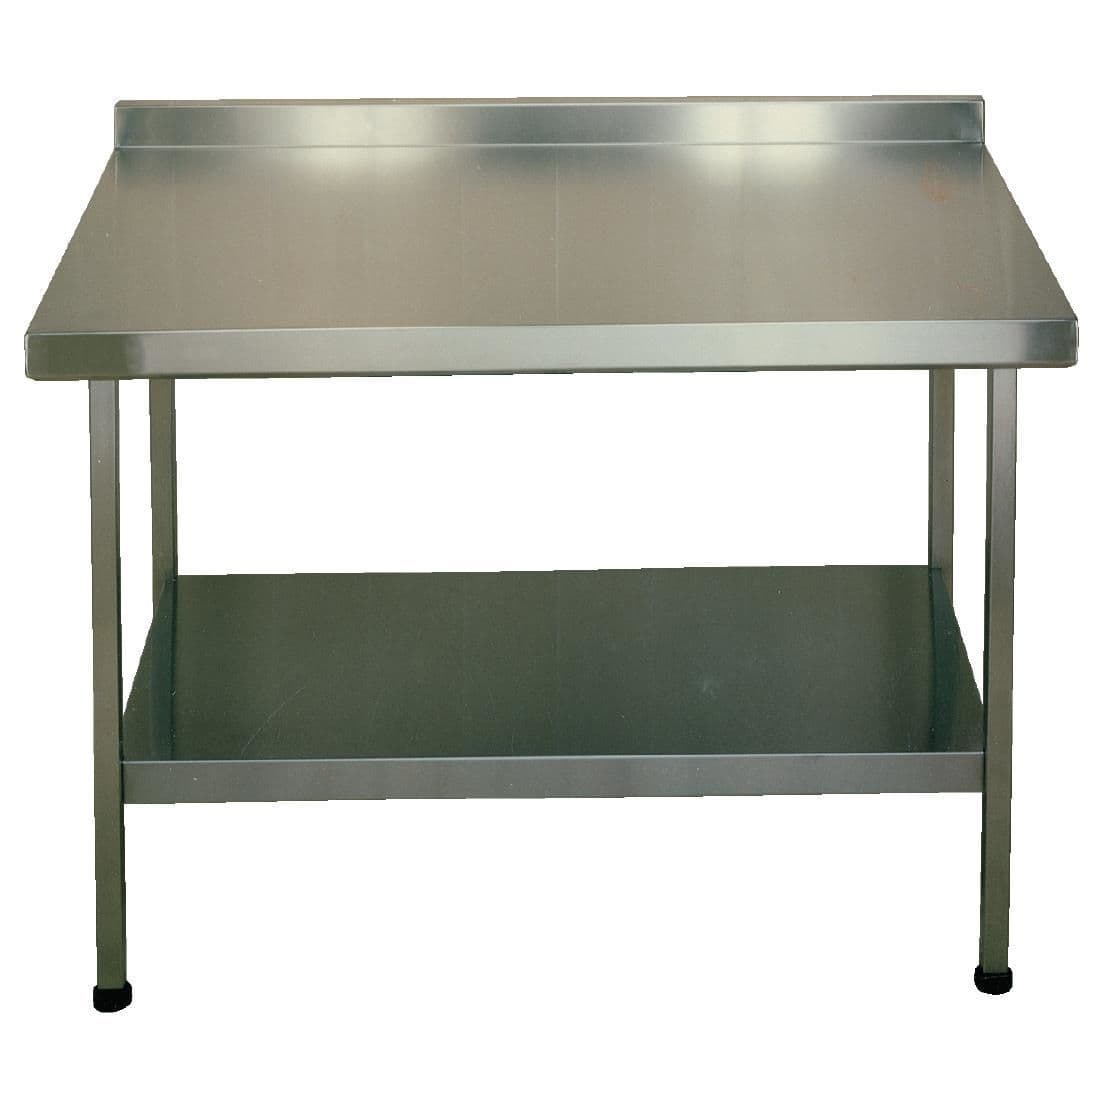 Franke Sissons Stainless Steel Wall Table with Upstand 600x600mm JD Catering Equipment Solutions Ltd